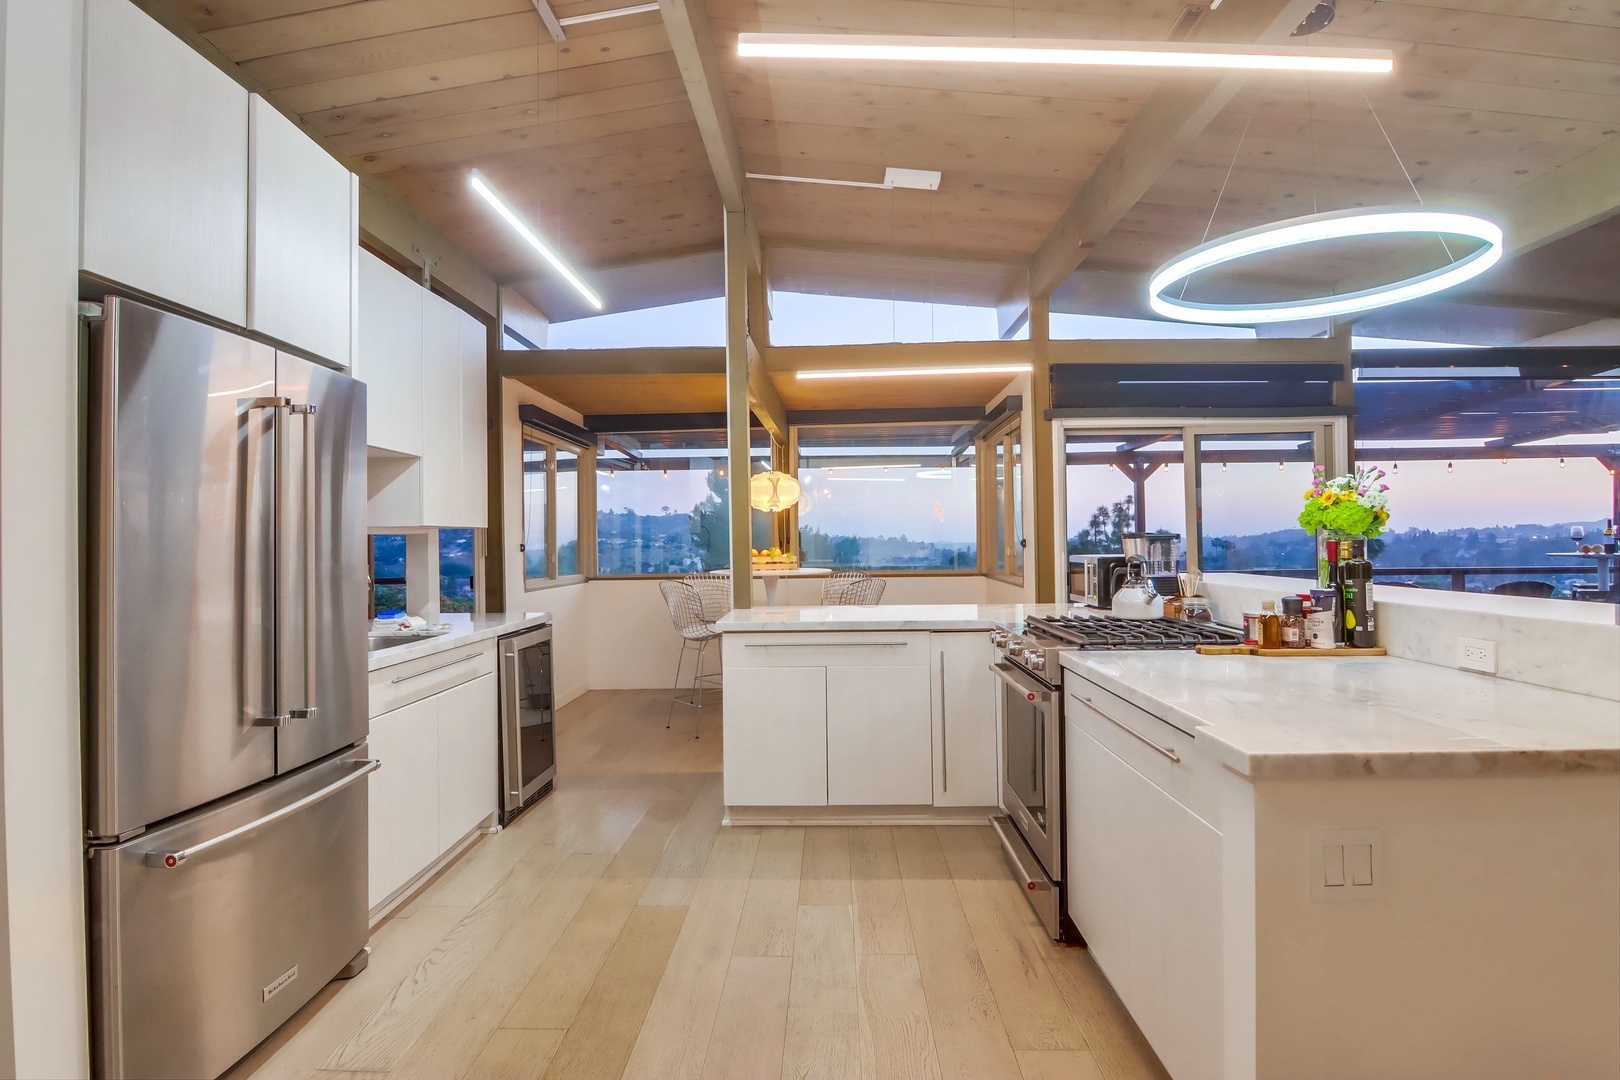 Fully equipped bright open kitchen